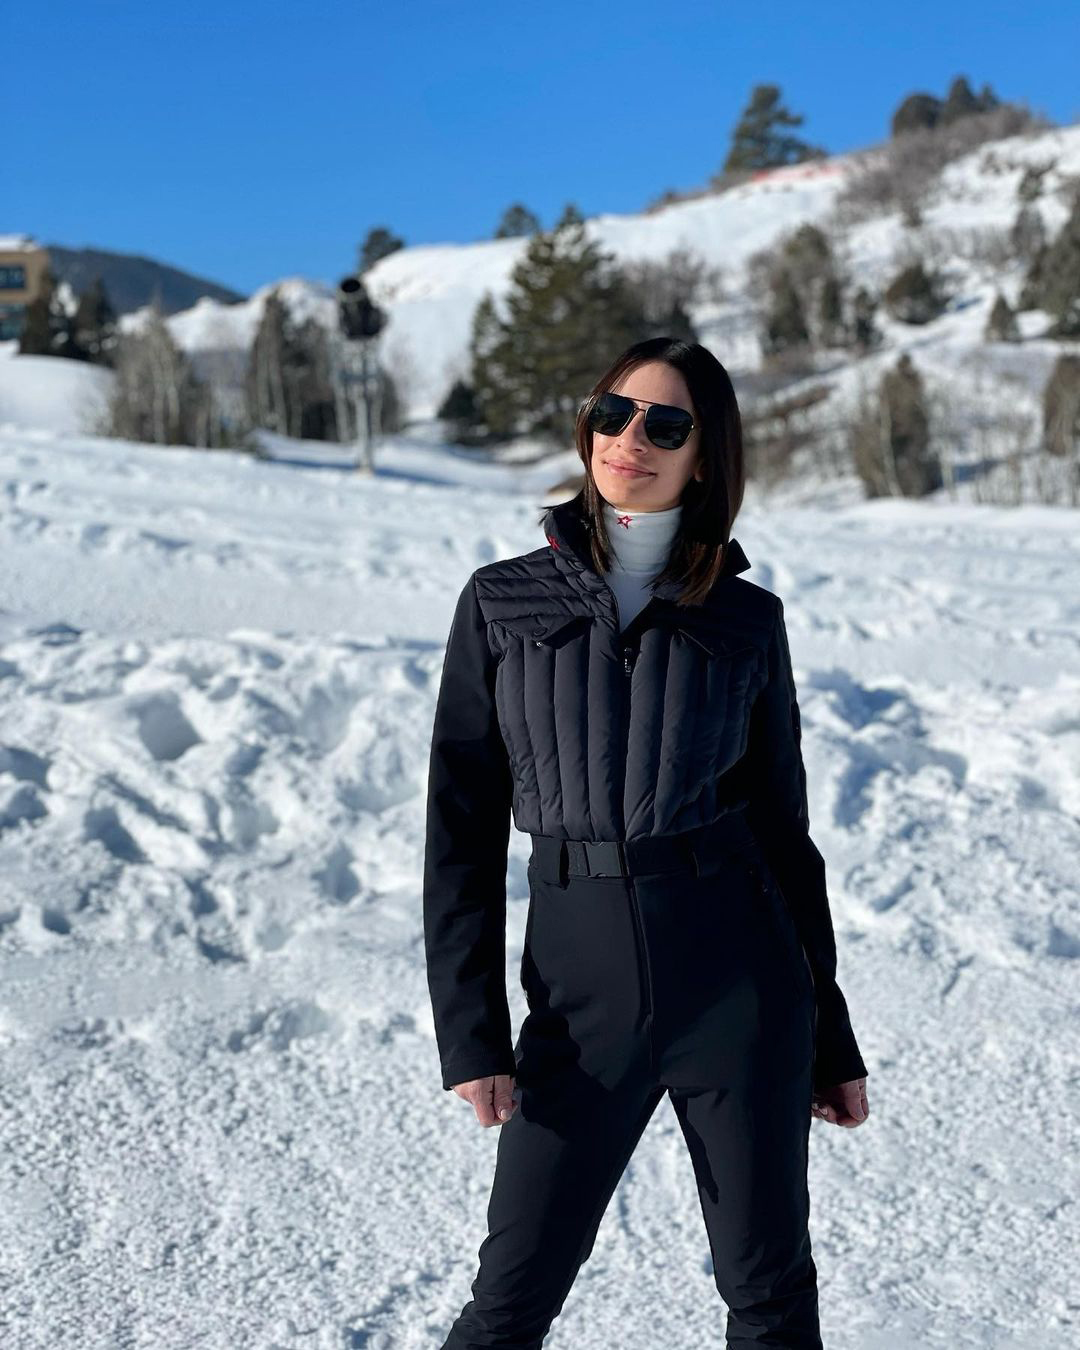 Lea Michele and More Stars Who Love a Winter Wonderland